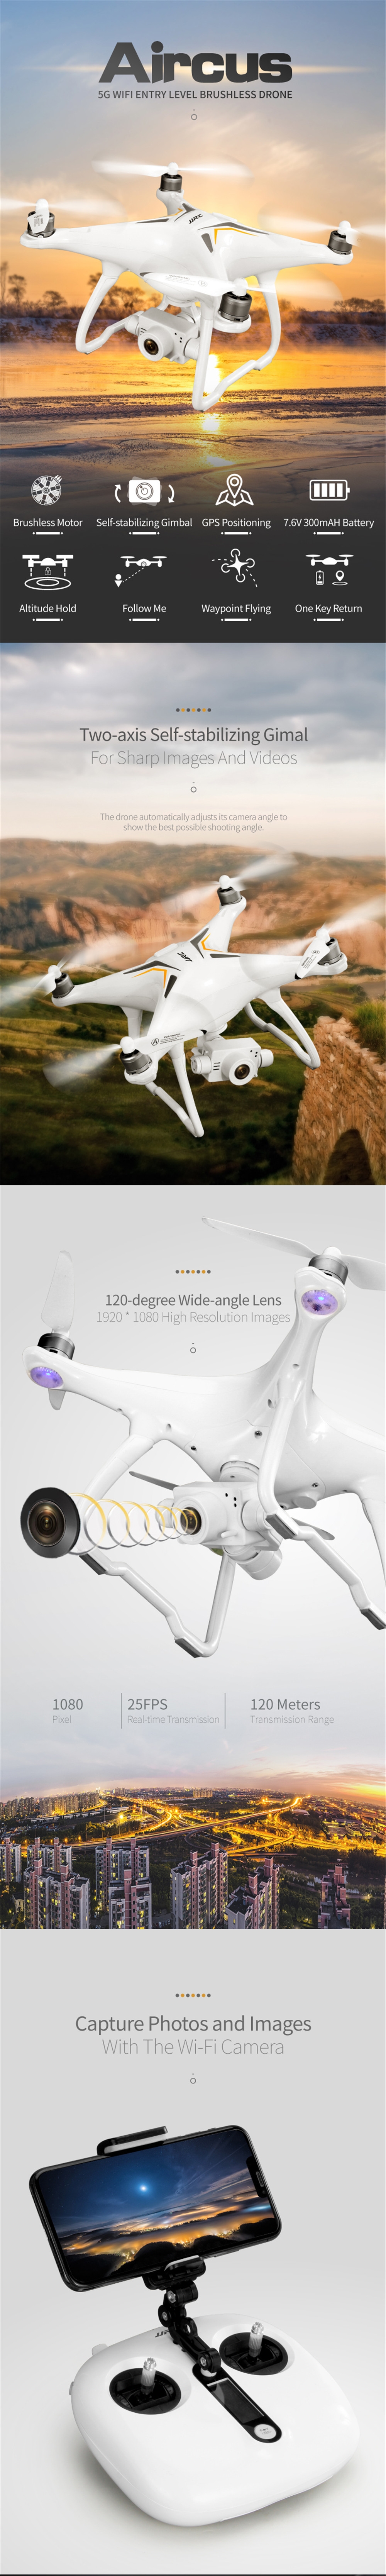 JJRC X6 Aircus 5G WIFI FPV Double GPS With 1080P Wide Angle Camera Two-Axis Self-Stabilizing Gimbal Altitude Mode RC Drone Quadcopter RTF